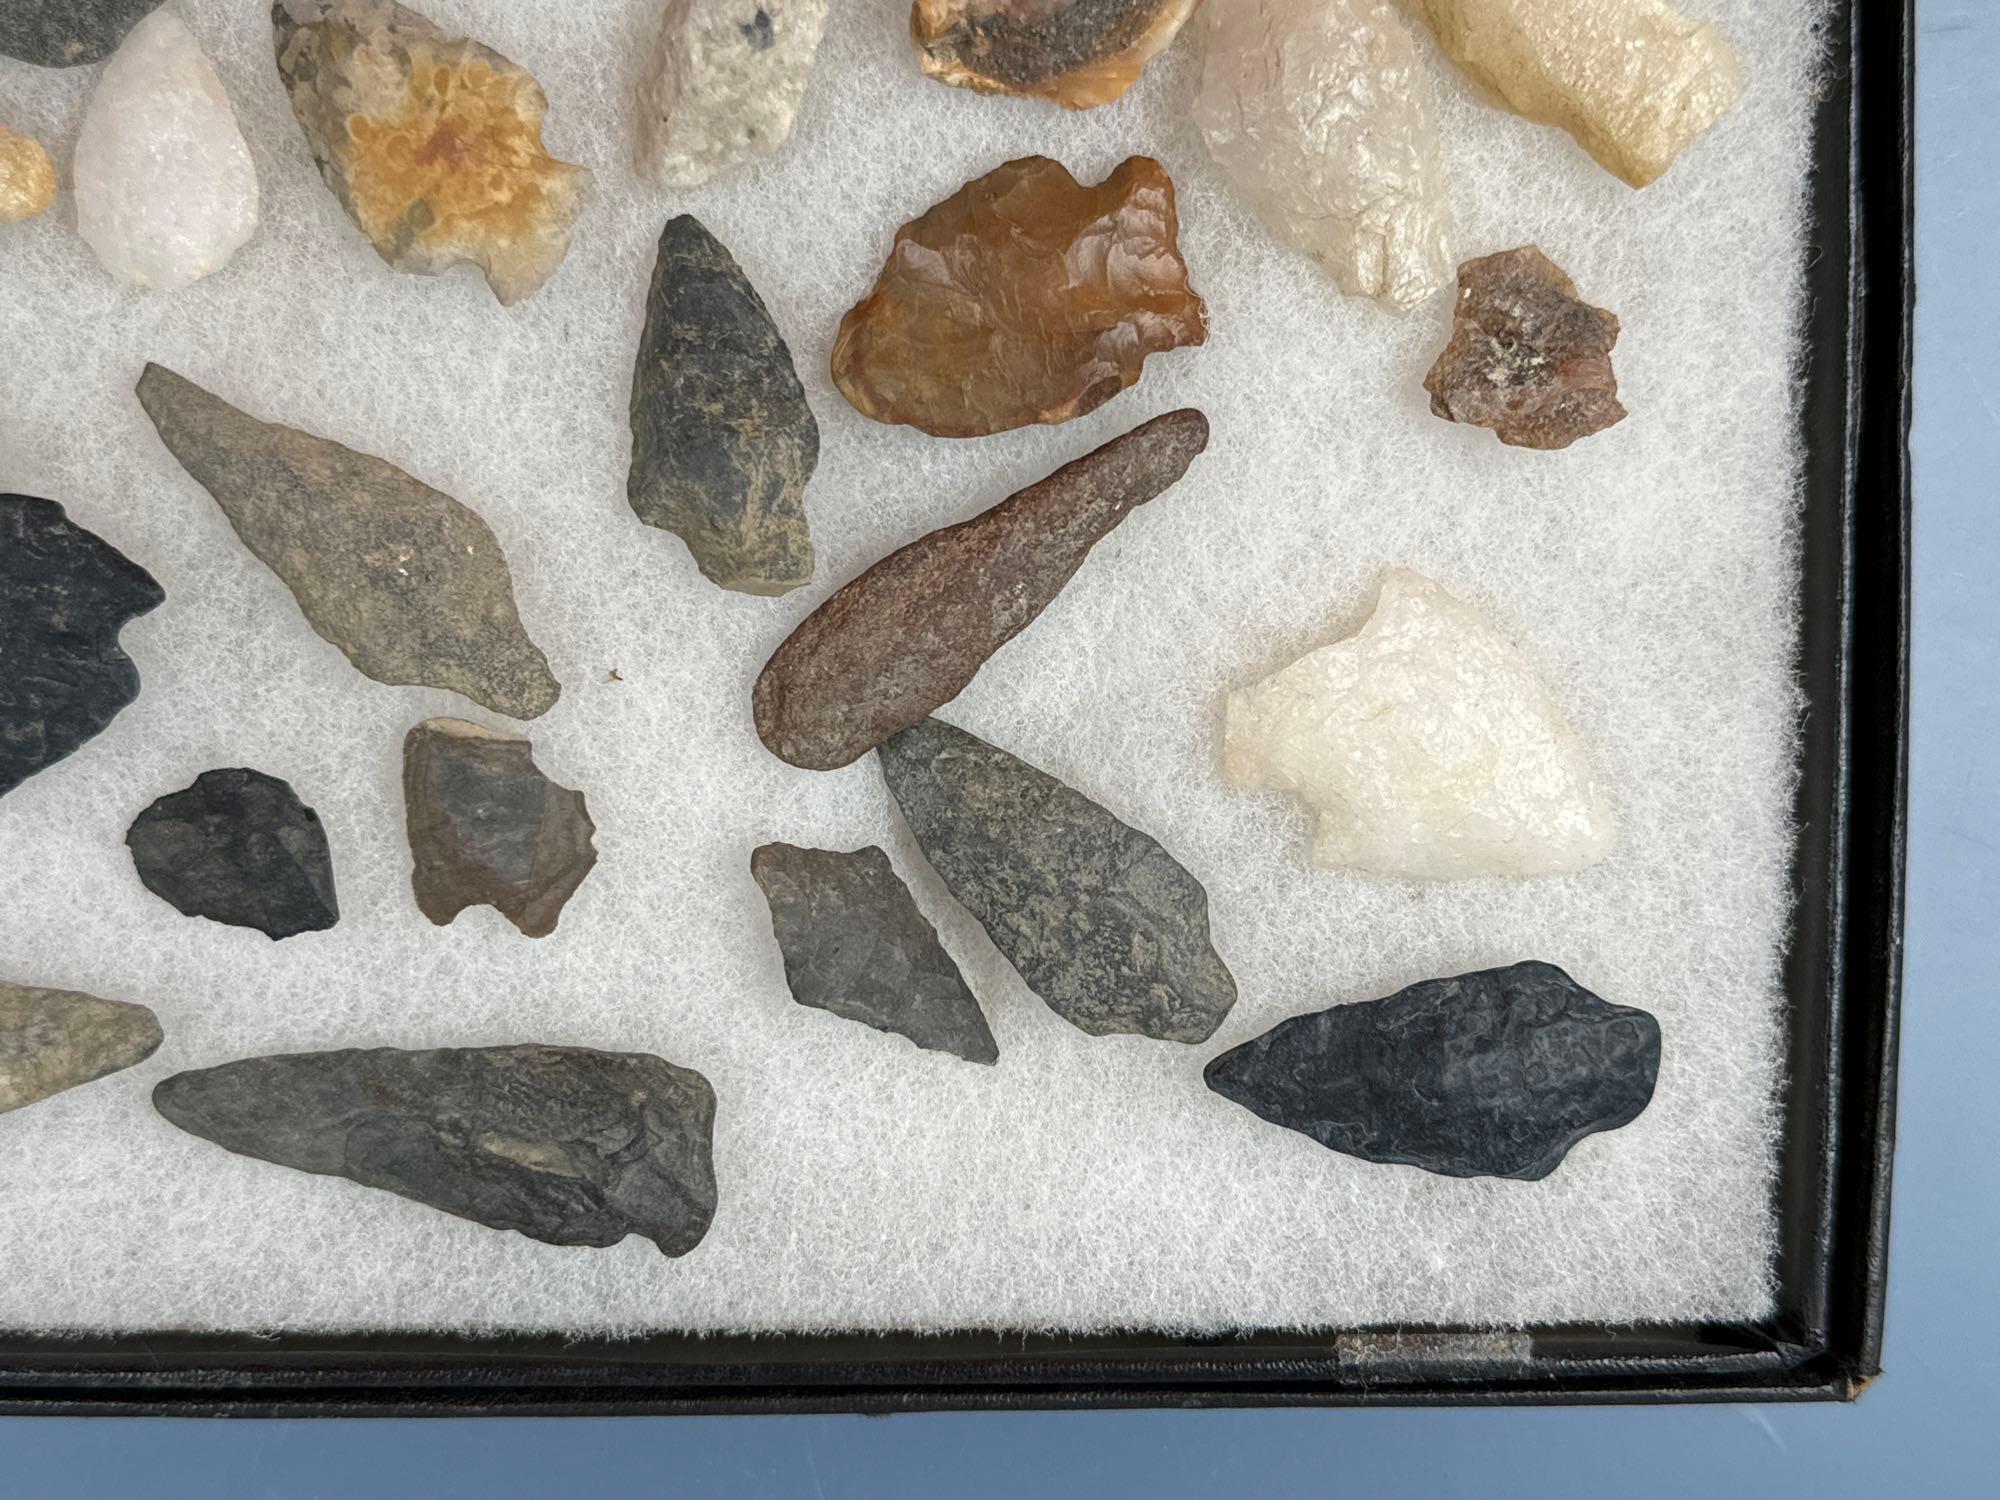 Lot of Various Arrowheads, Points, Longest is 2 3/8", Found in Southern New Jersey